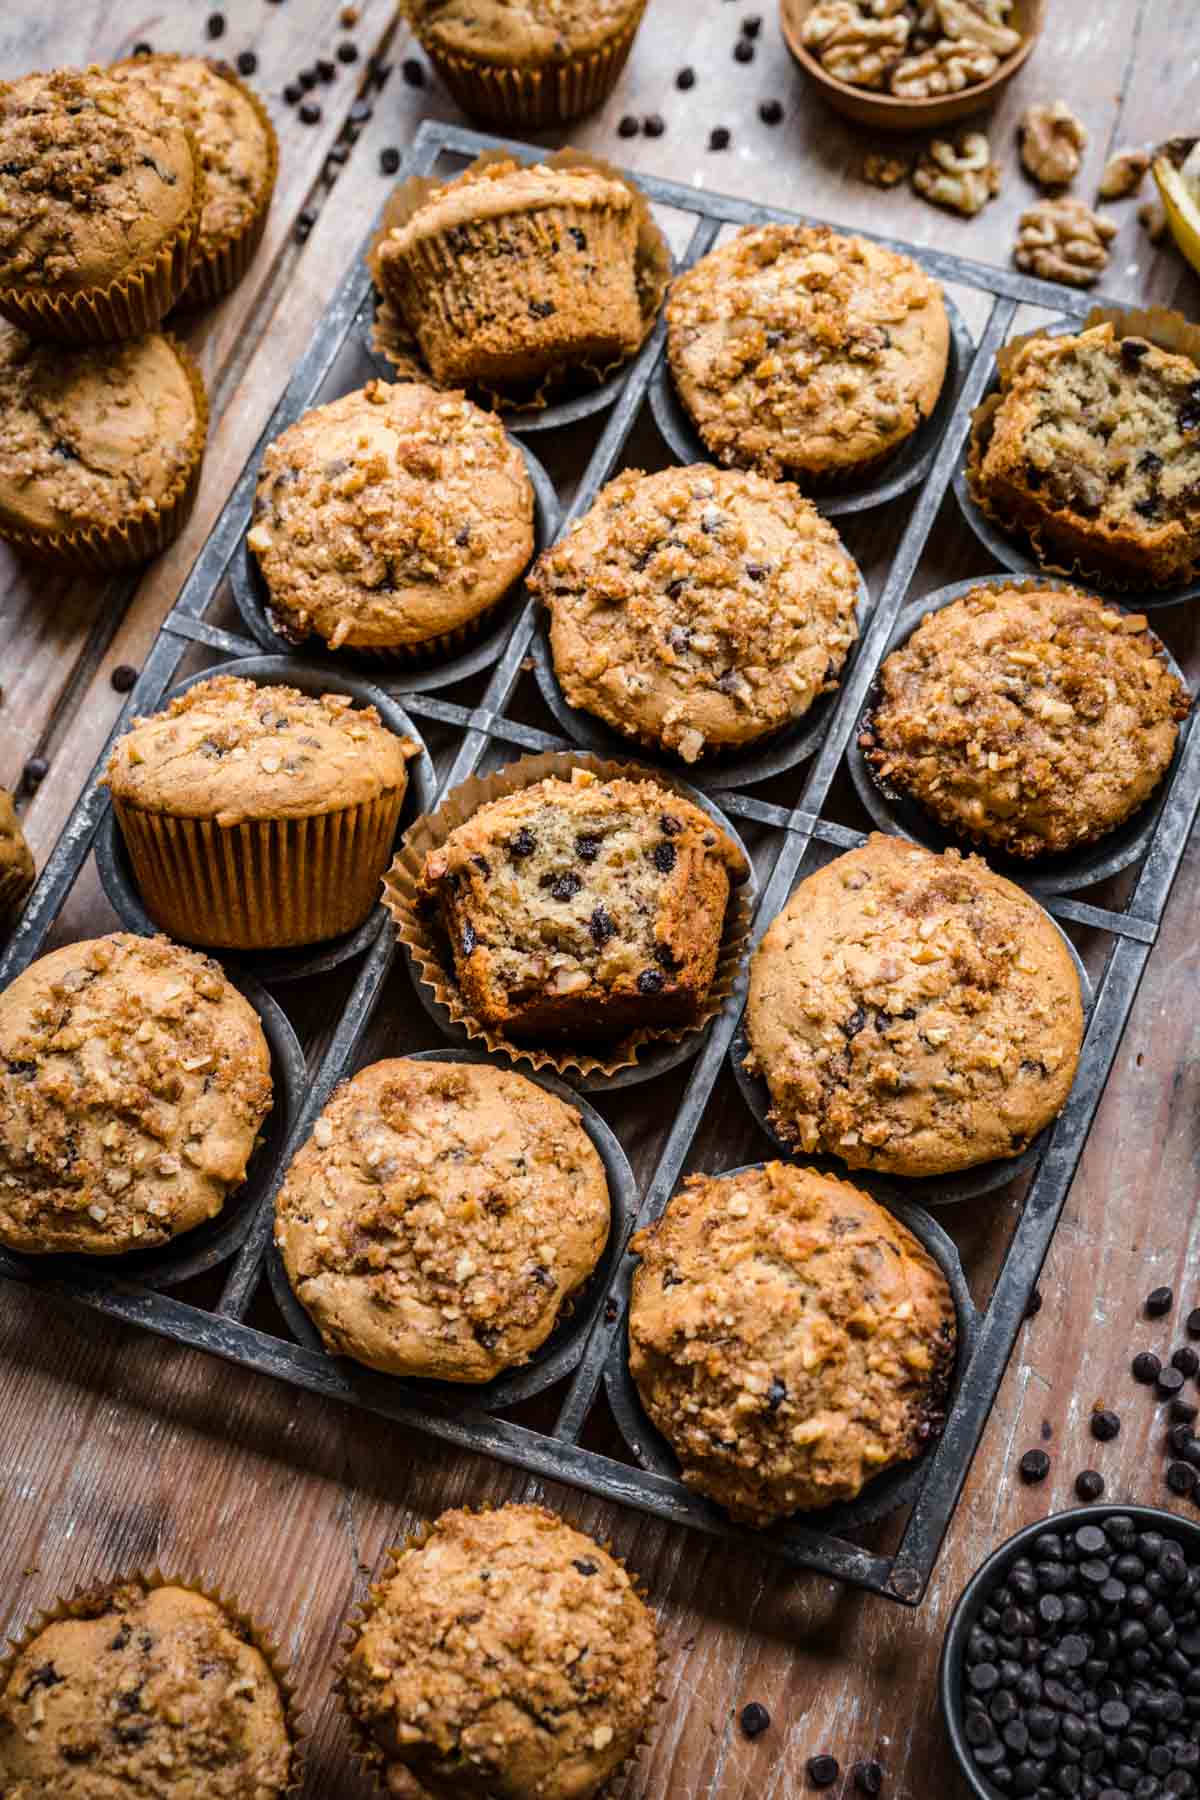 Several banana nut muffins in a muffin tin.